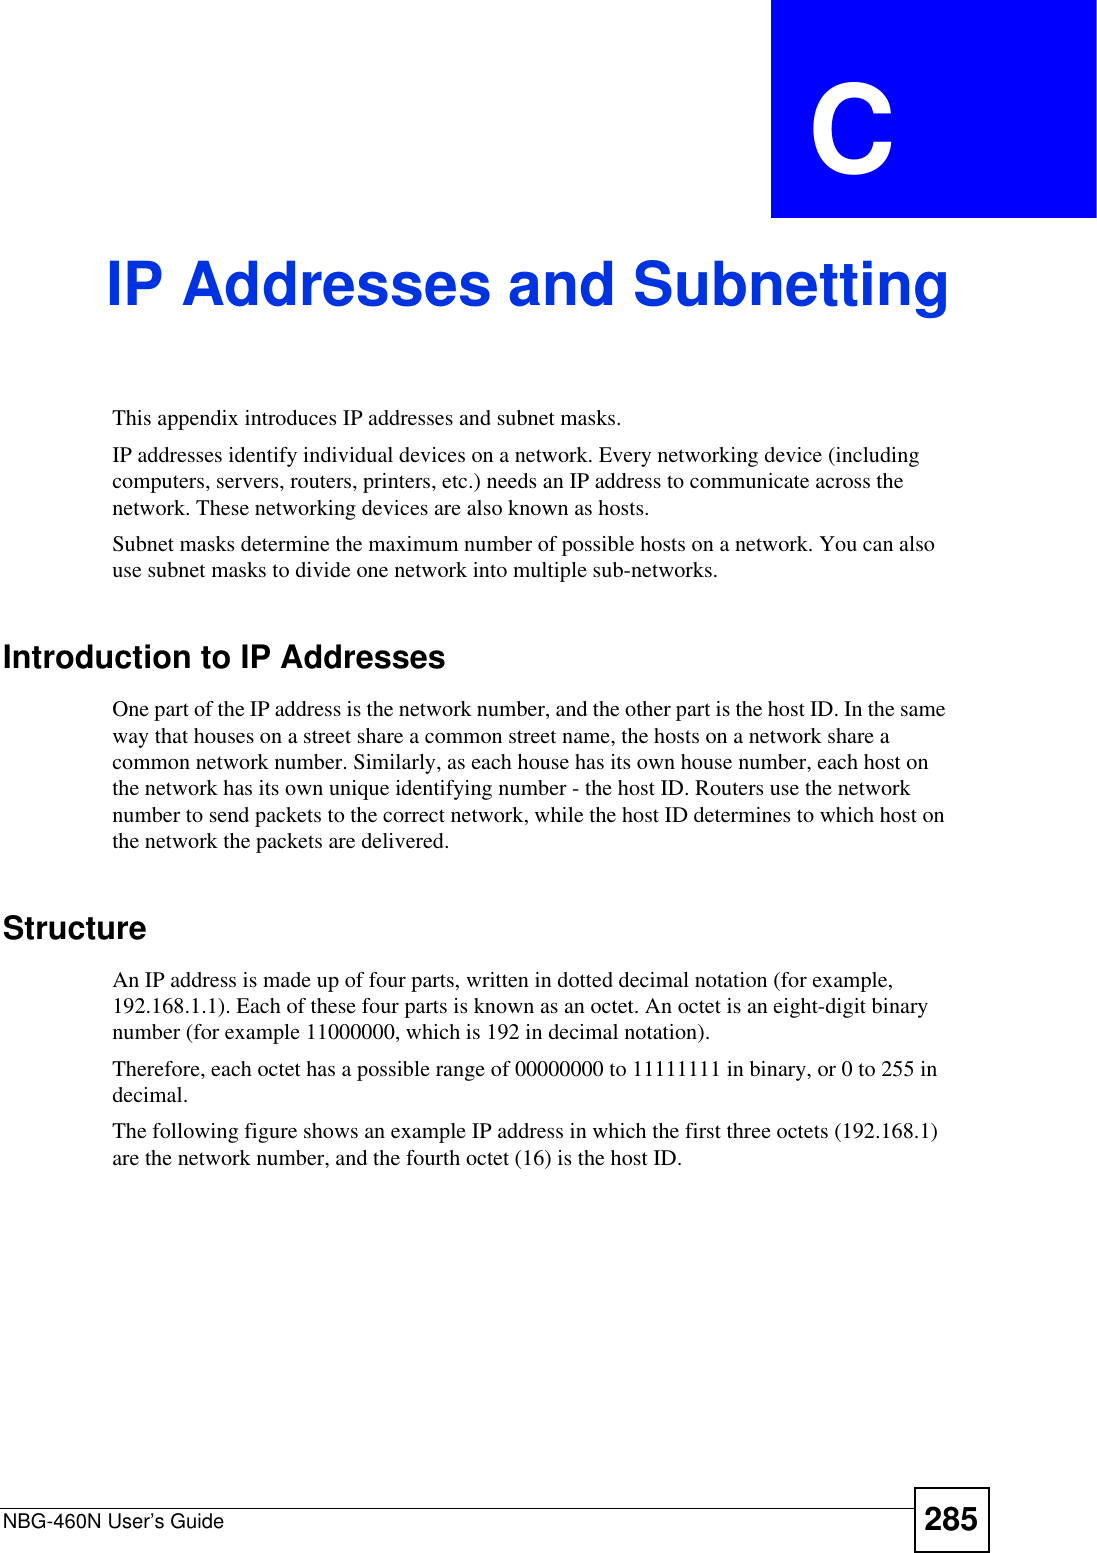 NBG-460N User’s Guide 285APPENDIX  C IP Addresses and SubnettingThis appendix introduces IP addresses and subnet masks. IP addresses identify individual devices on a network. Every networking device (including computers, servers, routers, printers, etc.) needs an IP address to communicate across the network. These networking devices are also known as hosts.Subnet masks determine the maximum number of possible hosts on a network. You can also use subnet masks to divide one network into multiple sub-networks.Introduction to IP AddressesOne part of the IP address is the network number, and the other part is the host ID. In the same way that houses on a street share a common street name, the hosts on a network share a common network number. Similarly, as each house has its own house number, each host on the network has its own unique identifying number - the host ID. Routers use the network number to send packets to the correct network, while the host ID determines to which host on the network the packets are delivered.StructureAn IP address is made up of four parts, written in dotted decimal notation (for example, 192.168.1.1). Each of these four parts is known as an octet. An octet is an eight-digit binary number (for example 11000000, which is 192 in decimal notation). Therefore, each octet has a possible range of 00000000 to 11111111 in binary, or 0 to 255 in decimal.The following figure shows an example IP address in which the first three octets (192.168.1) are the network number, and the fourth octet (16) is the host ID.